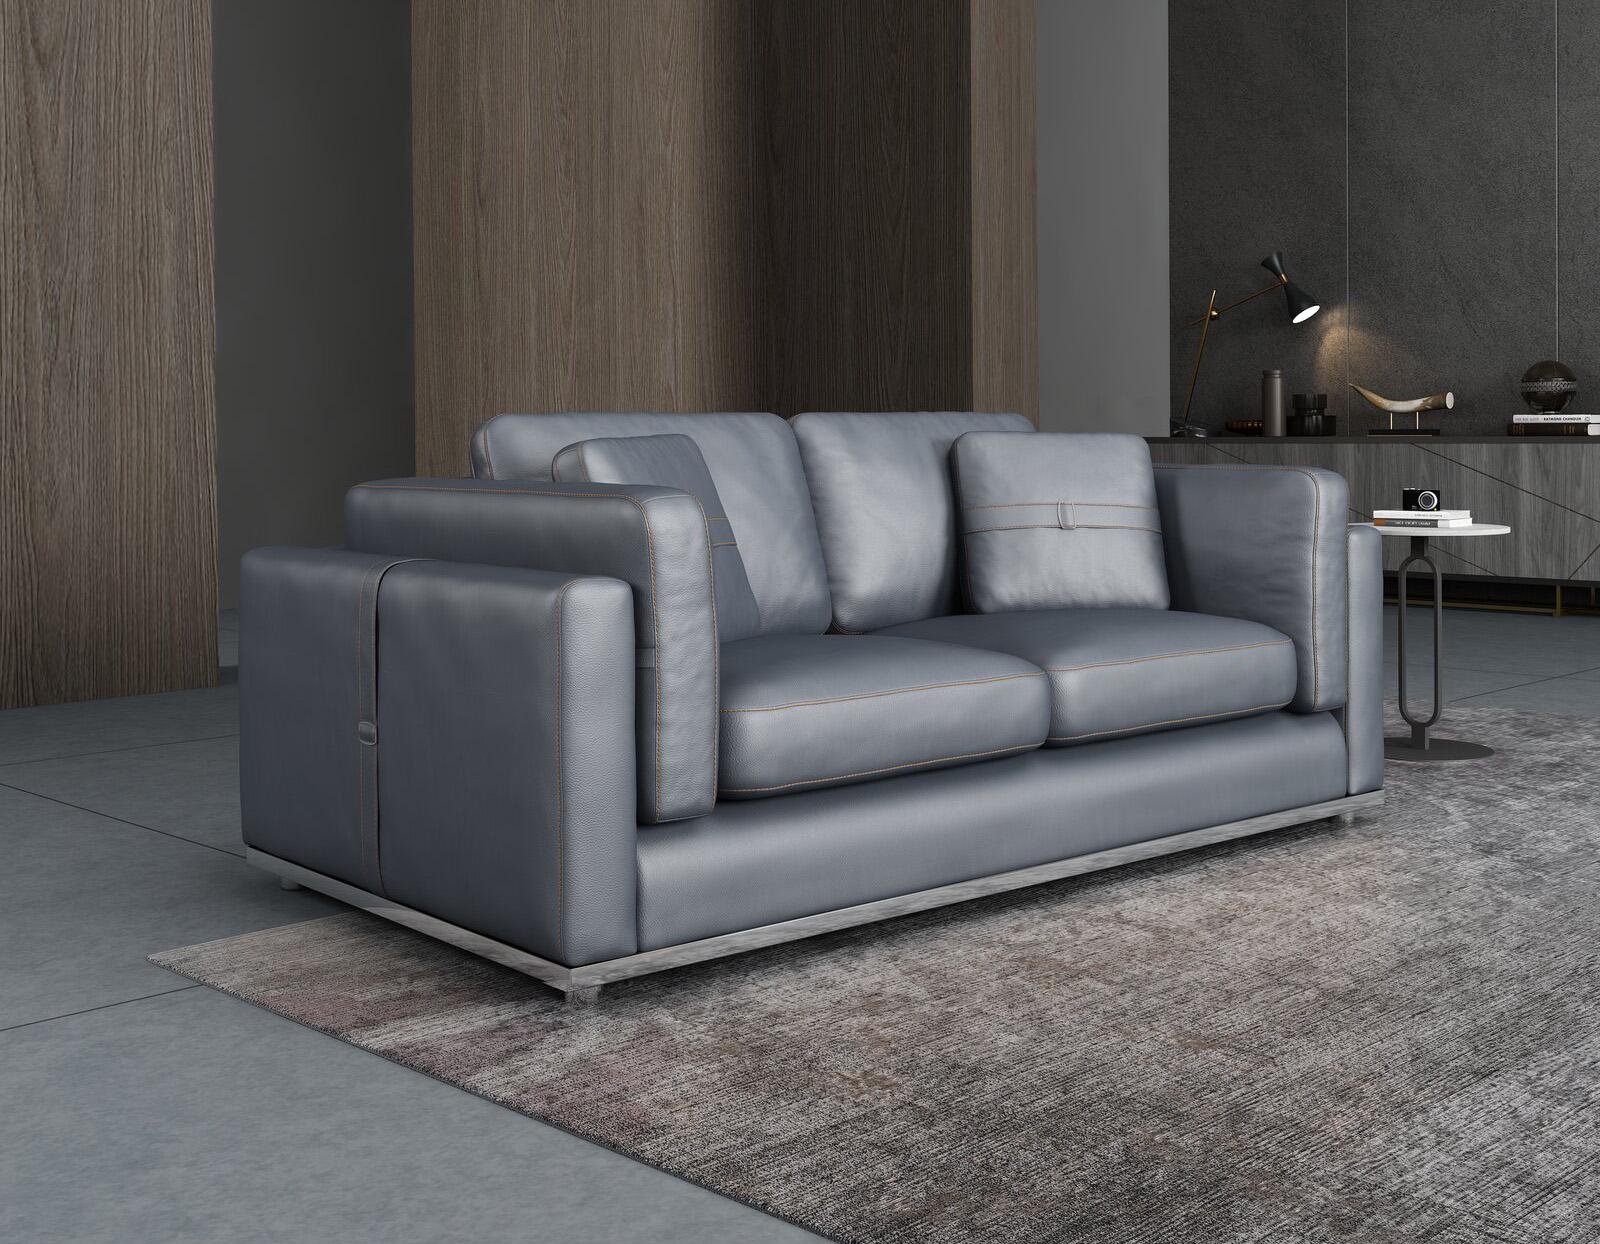 Contemporary, Modern Loveseat PICASSO EF-25550-L in Smoke, Gray Leather